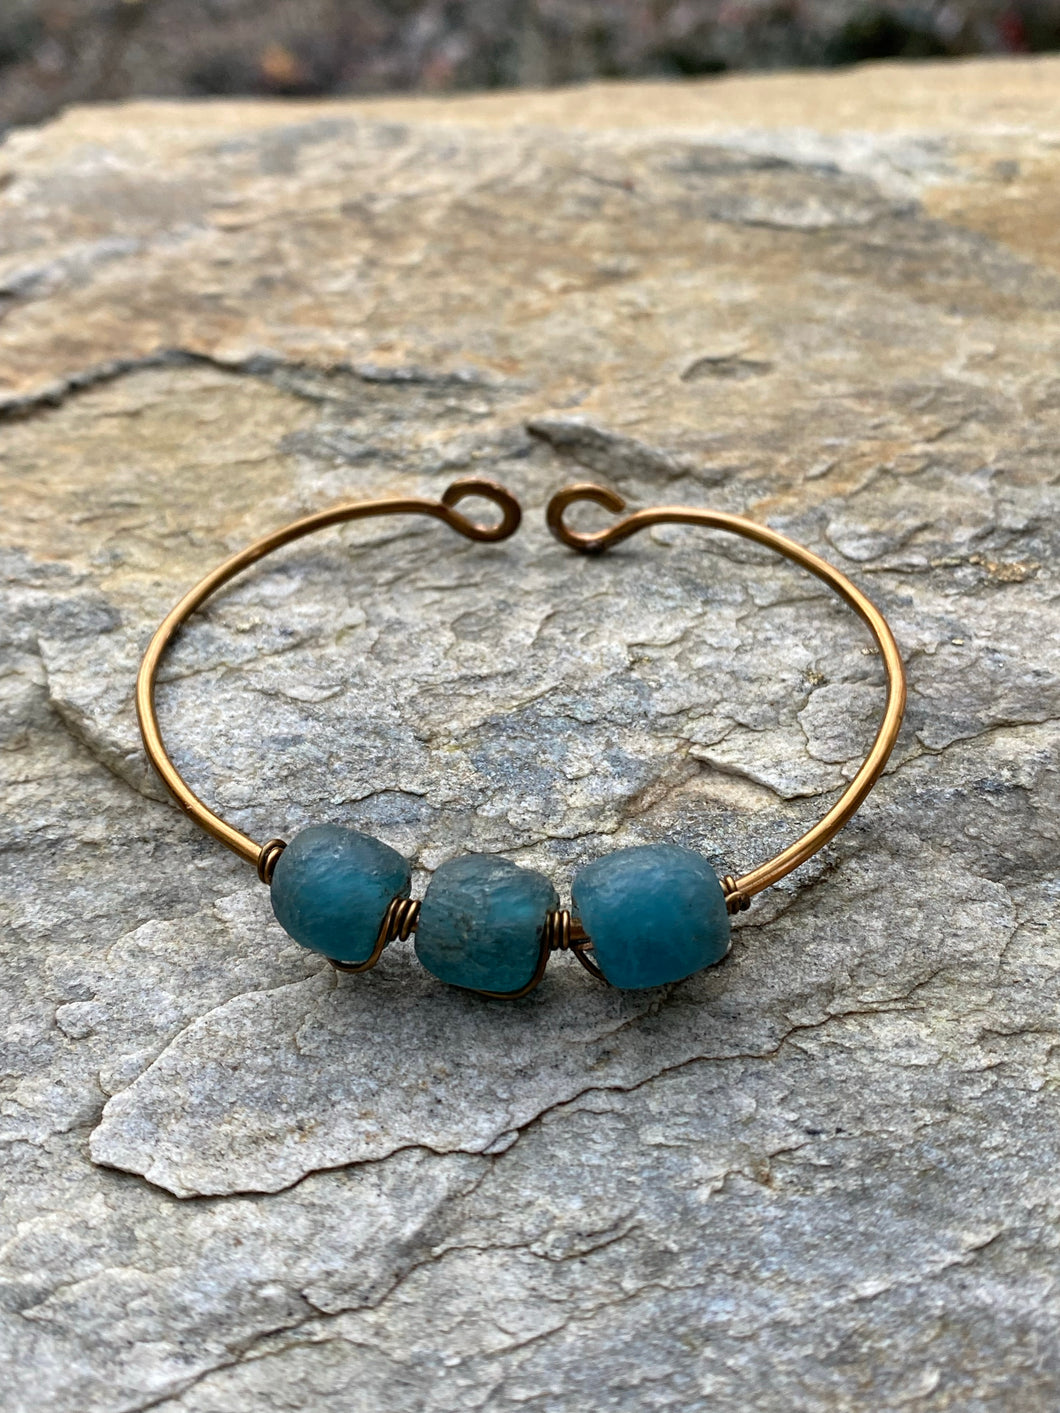 Recycled Blue Glass and Bronze Bracelet - Rocky Mountains